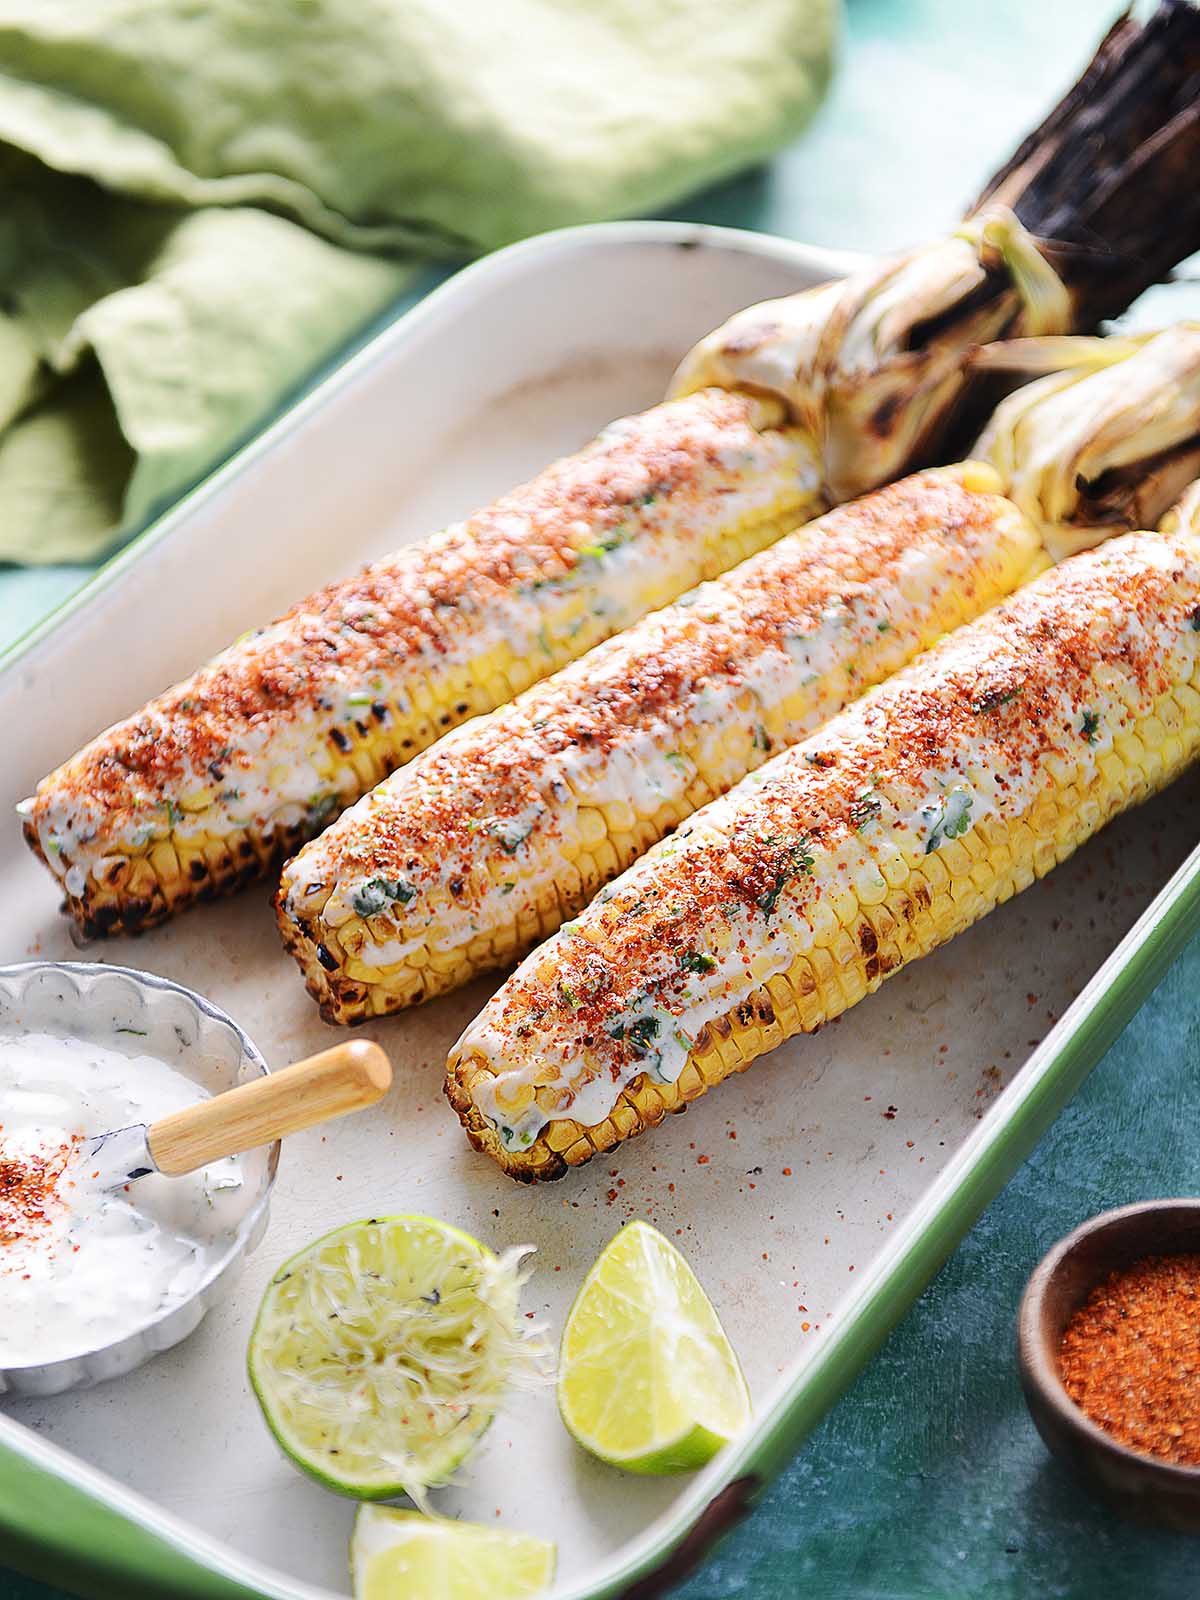 Three Elote Asado with the husk pulled back and crema on top of the corn.